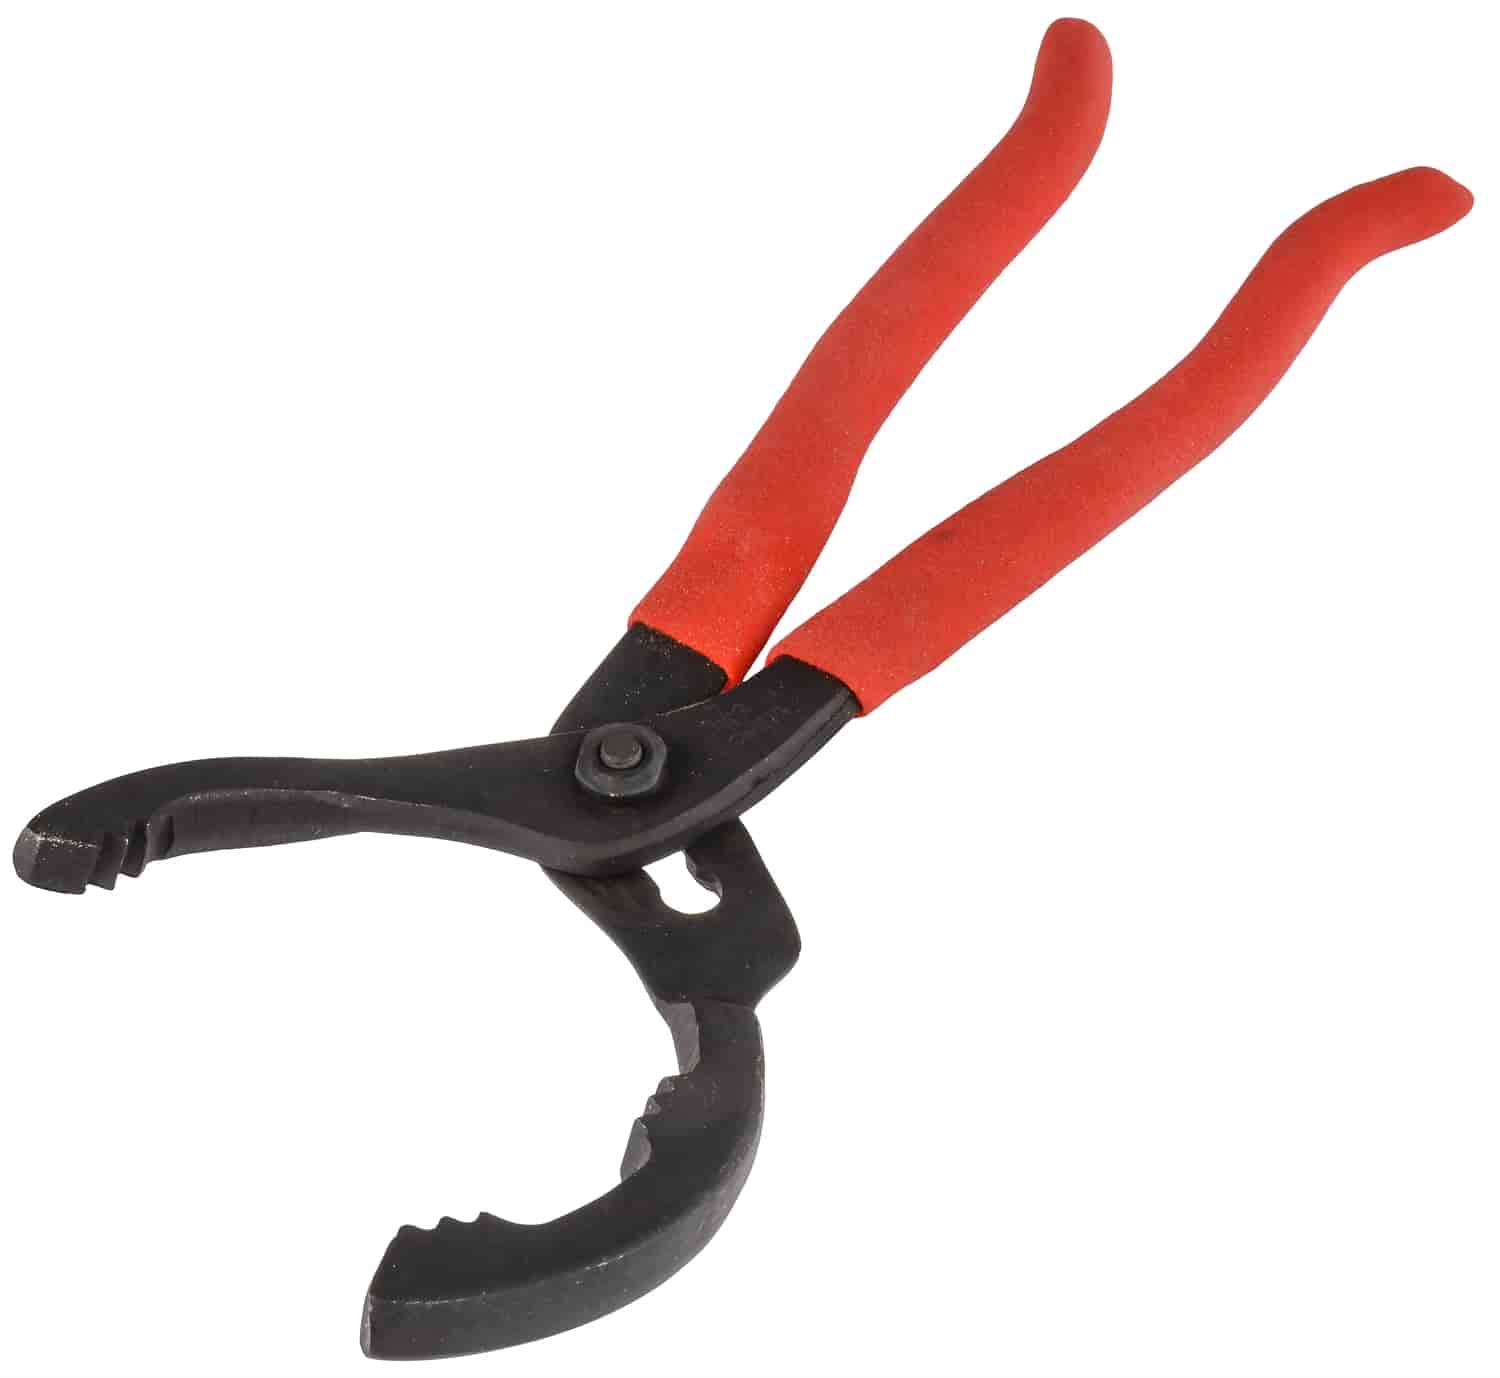 Oil Filter Pliers Range 1-7/8 in. to 4 in.